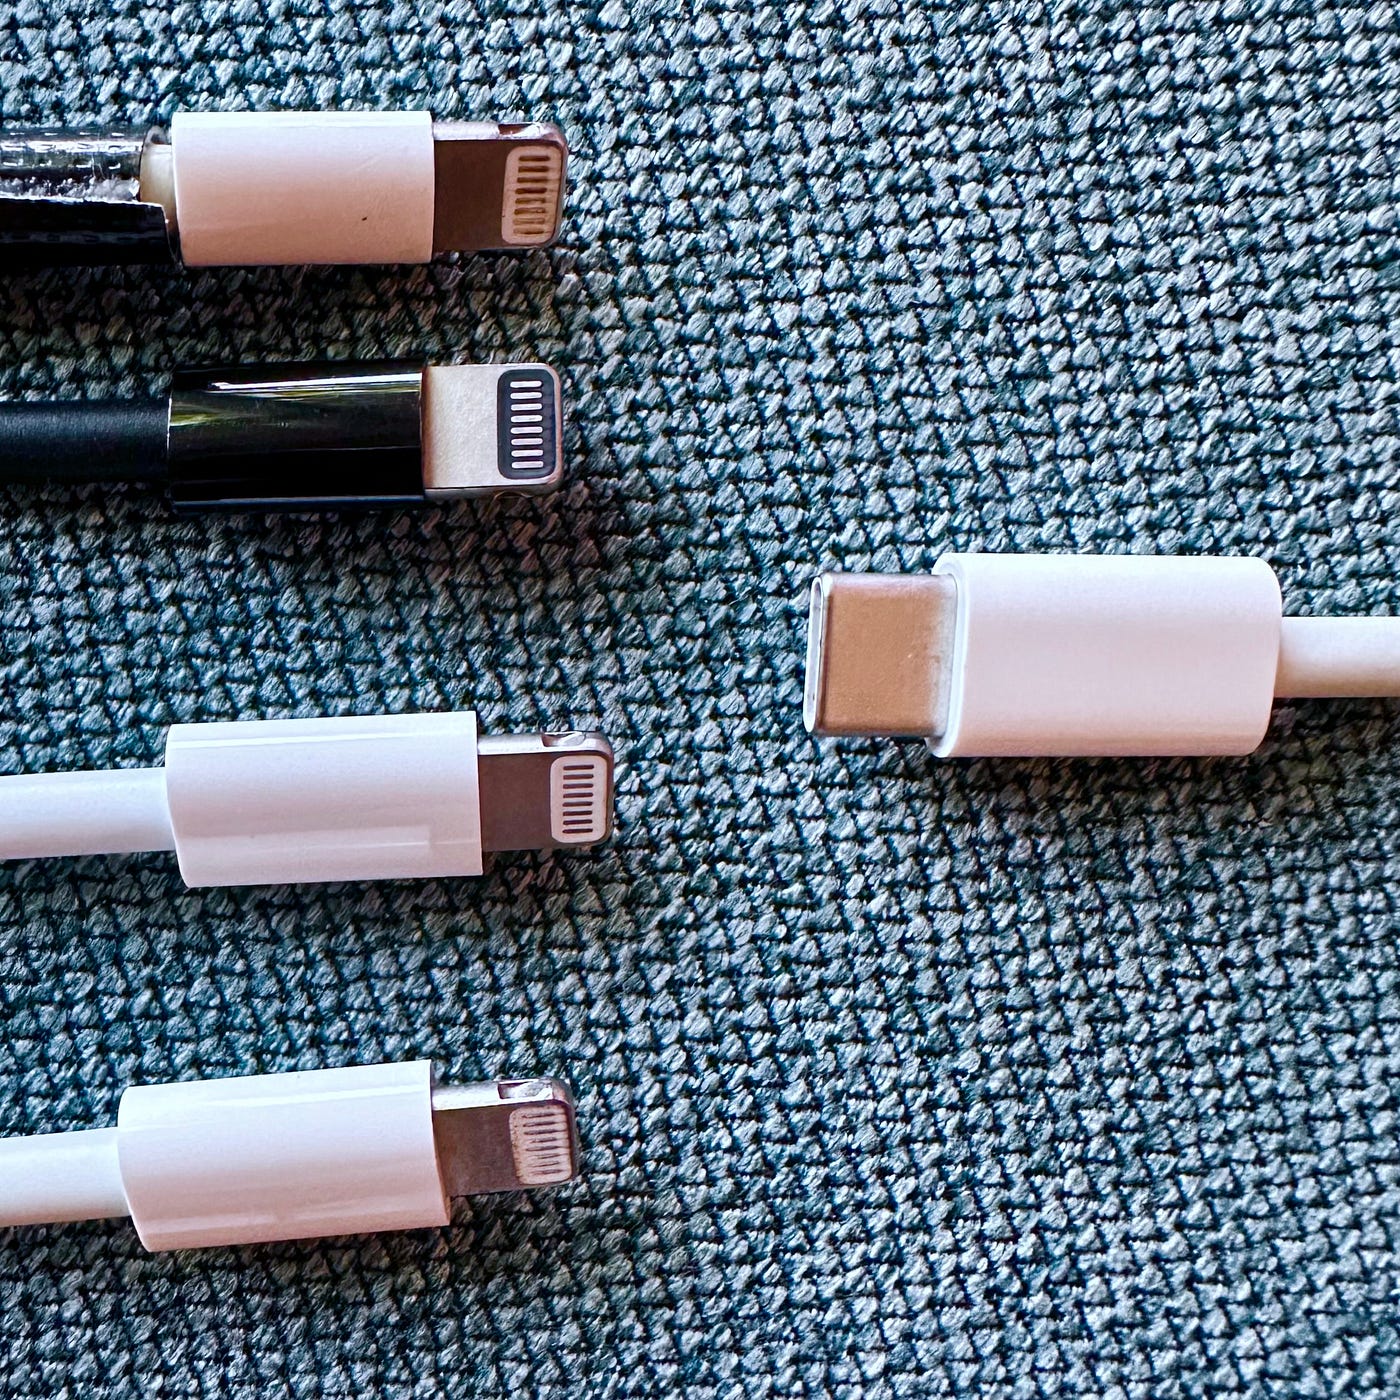 Apple's remaining Lightning devices and when they'll switch to USB-C